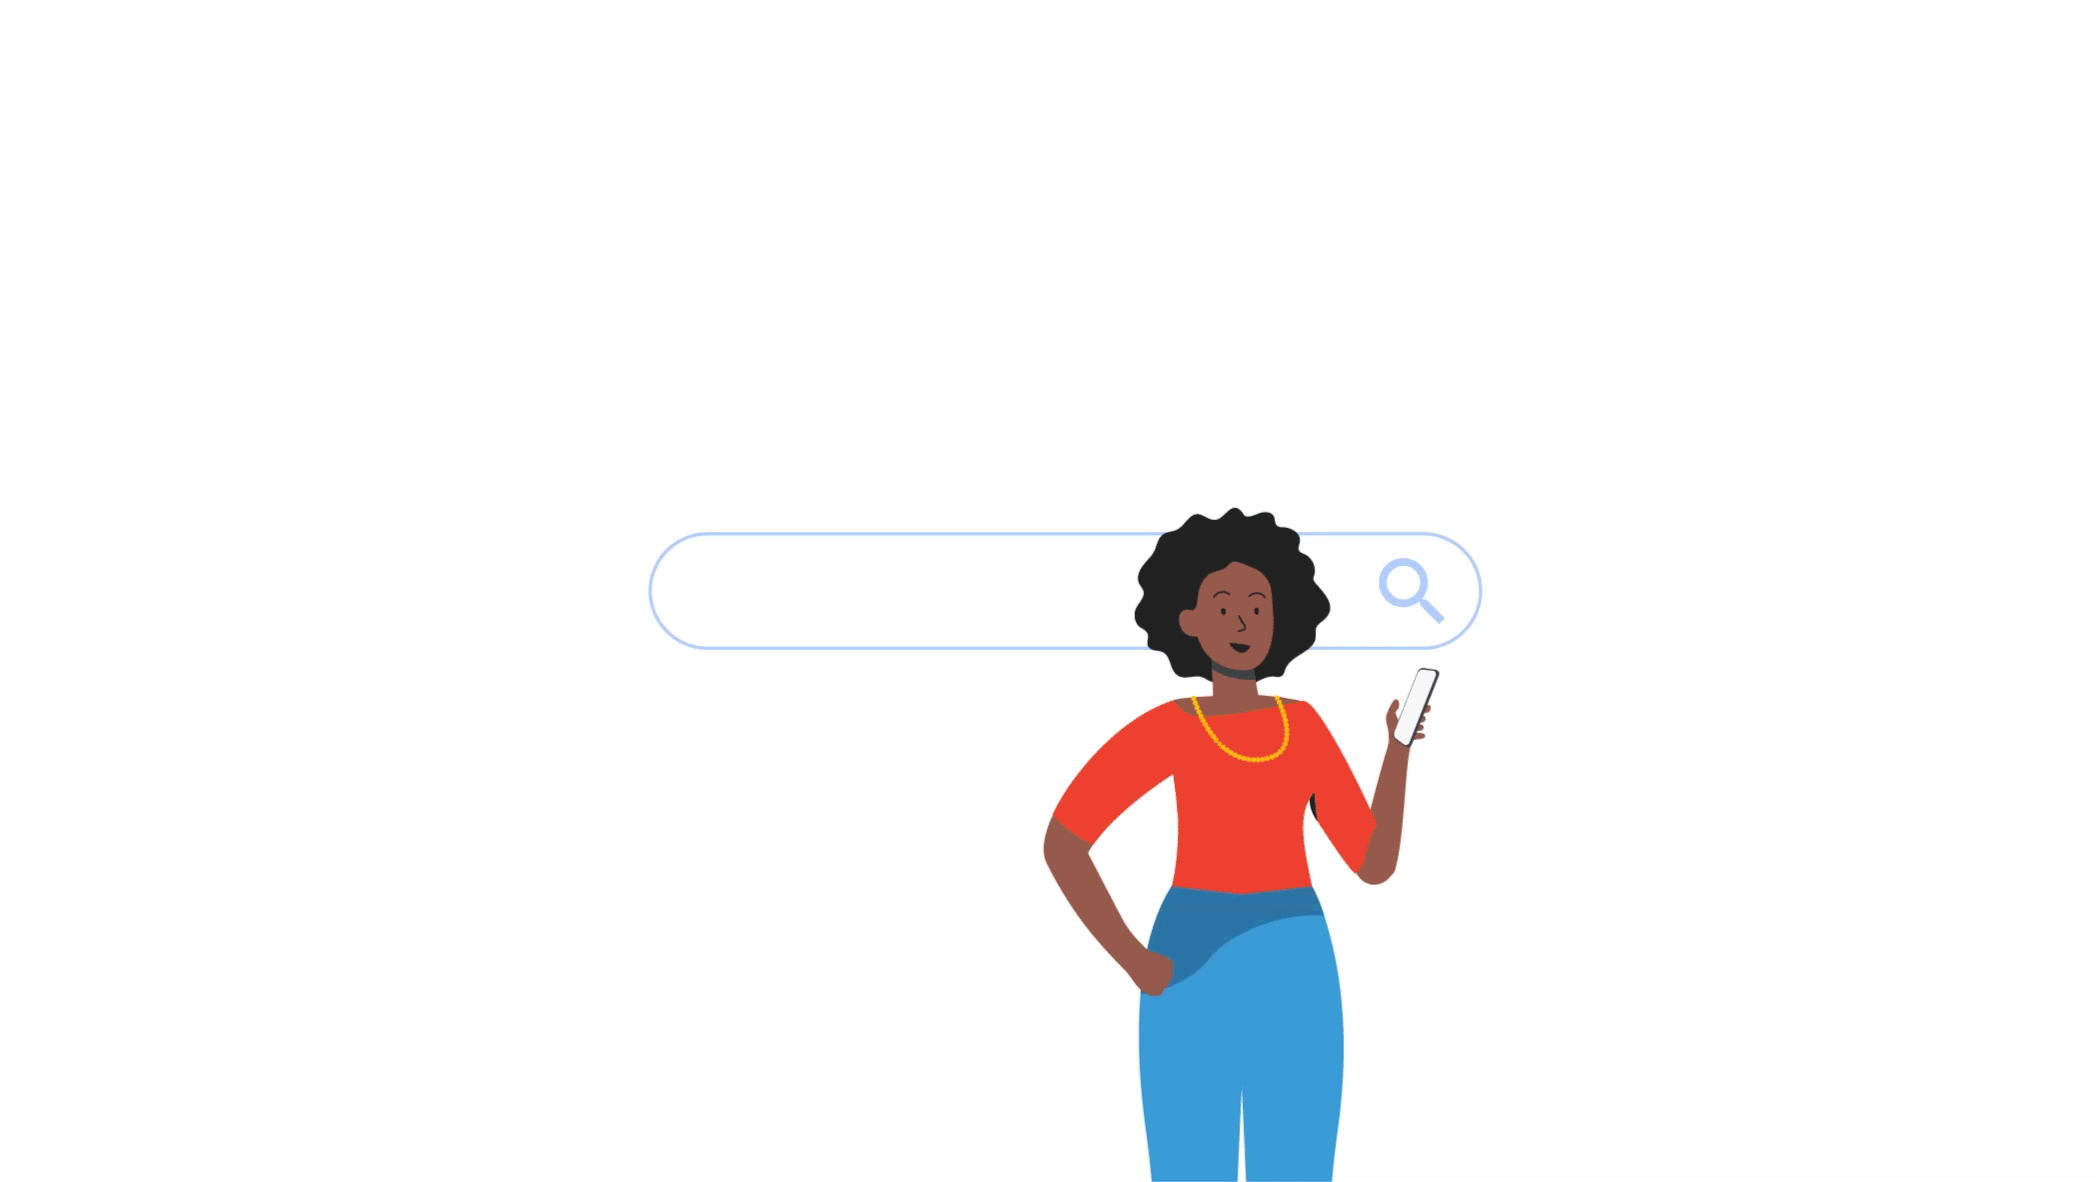 Illustrated gif of a Google search for “Hotels near me” appears above a woman looking at her phone. Panels showing Google products like Google Maps, YouTube and Gmail appear around the search bar.